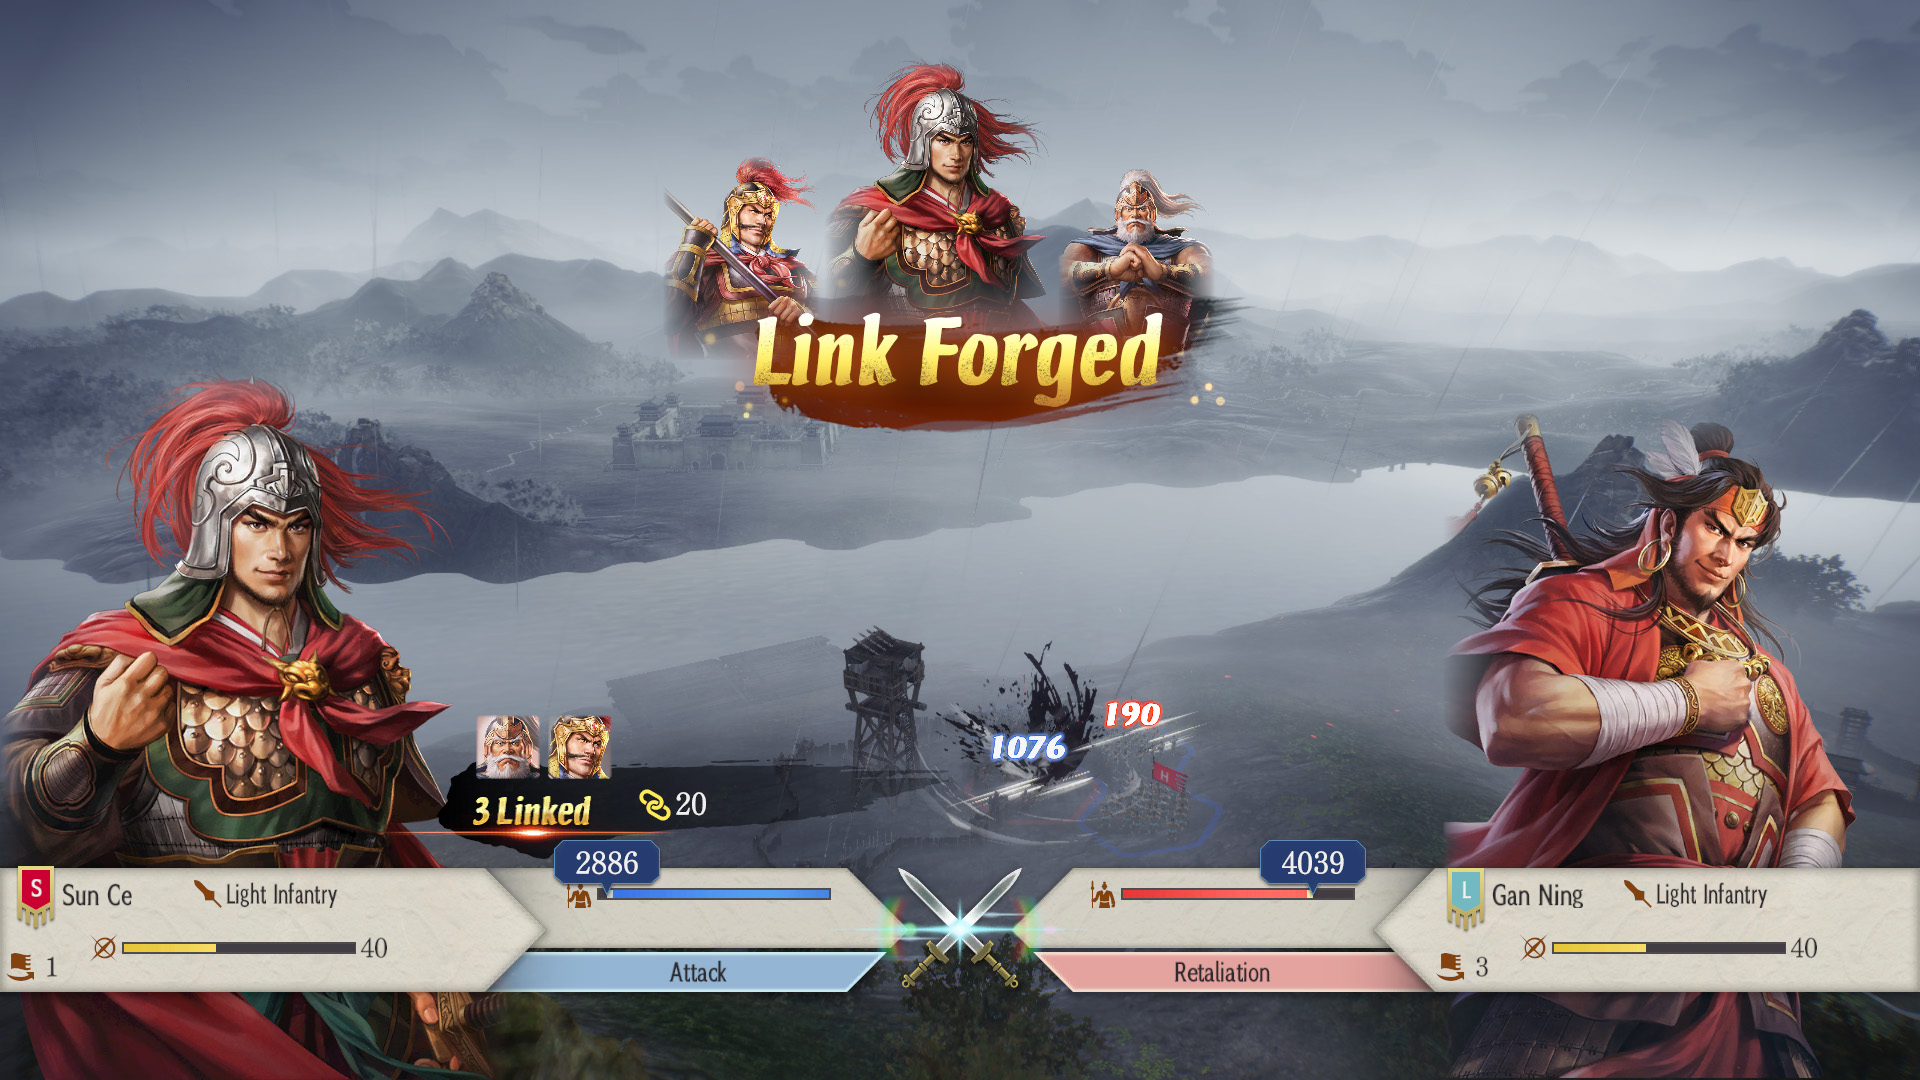 A screenshot from Romance of the Three Kingdoms 8 Remake. Sun Ce and Gan Ning are on the screen alongside the words Link Forged.